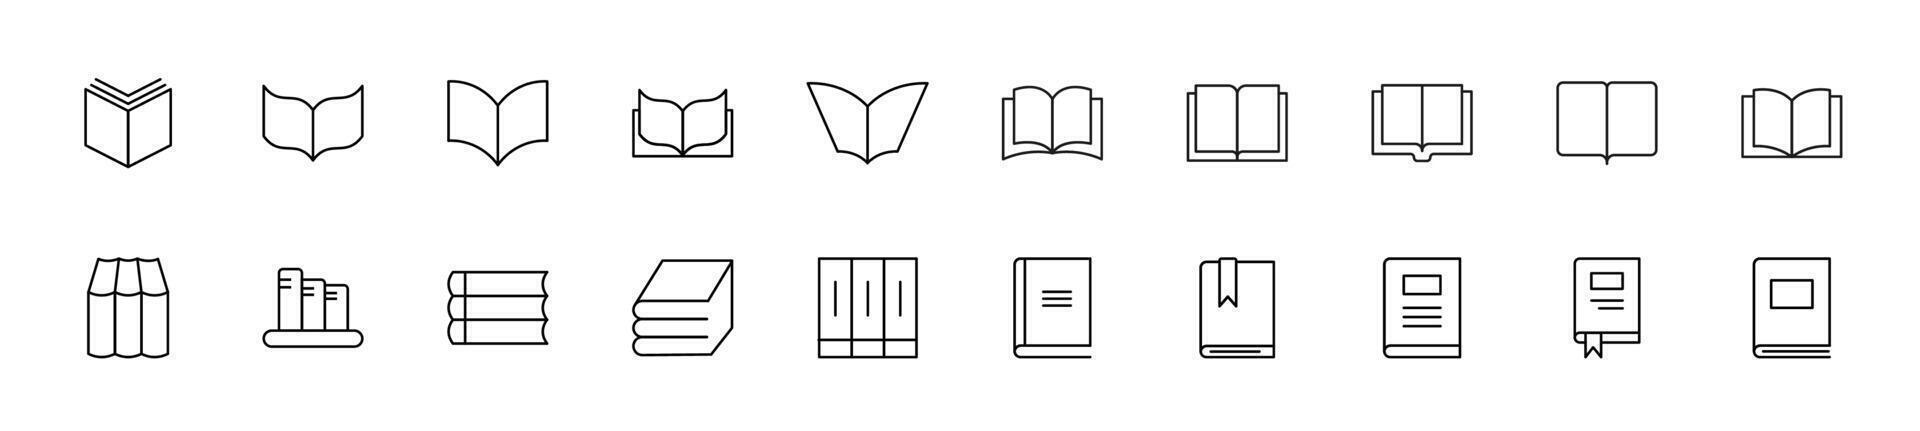 Collection of thin line icons of books as symbol of study. Linear sign and editable stroke. Suitable for web sites, books, articles vector